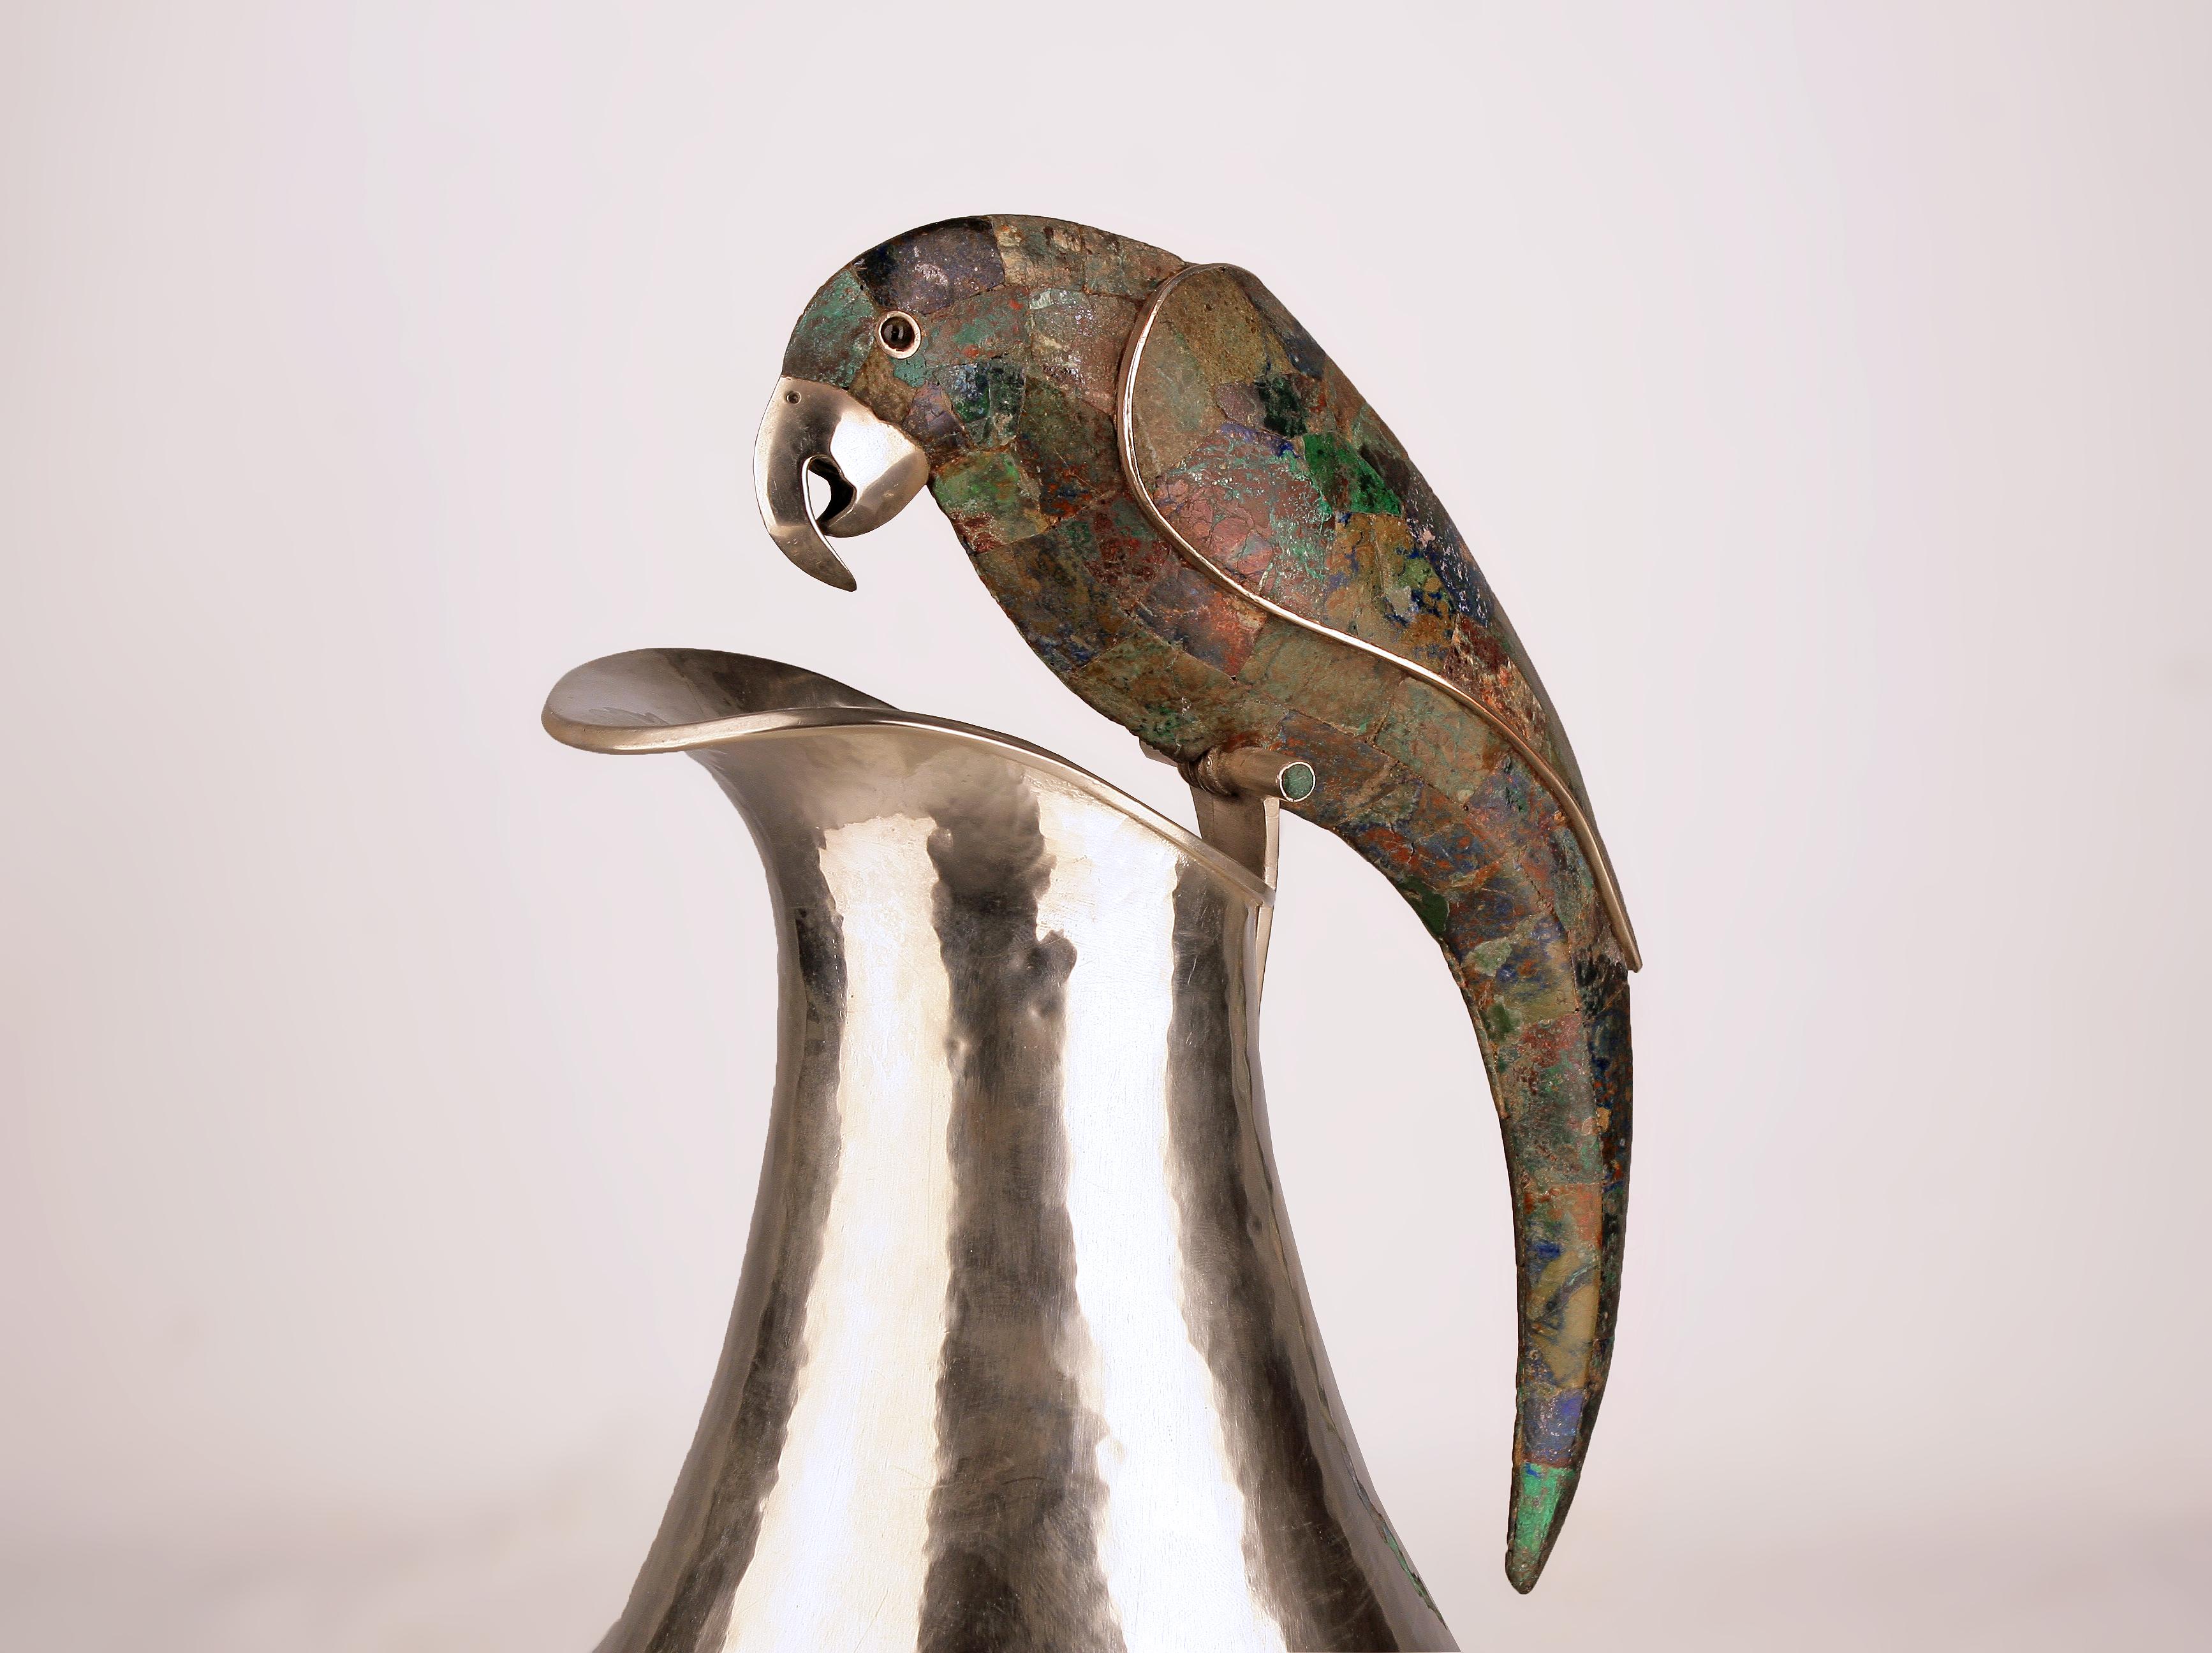 Silvered Mid-20th C. Mexican Silver Pitcher with Gemstone Parrot Handle by Los Castillo